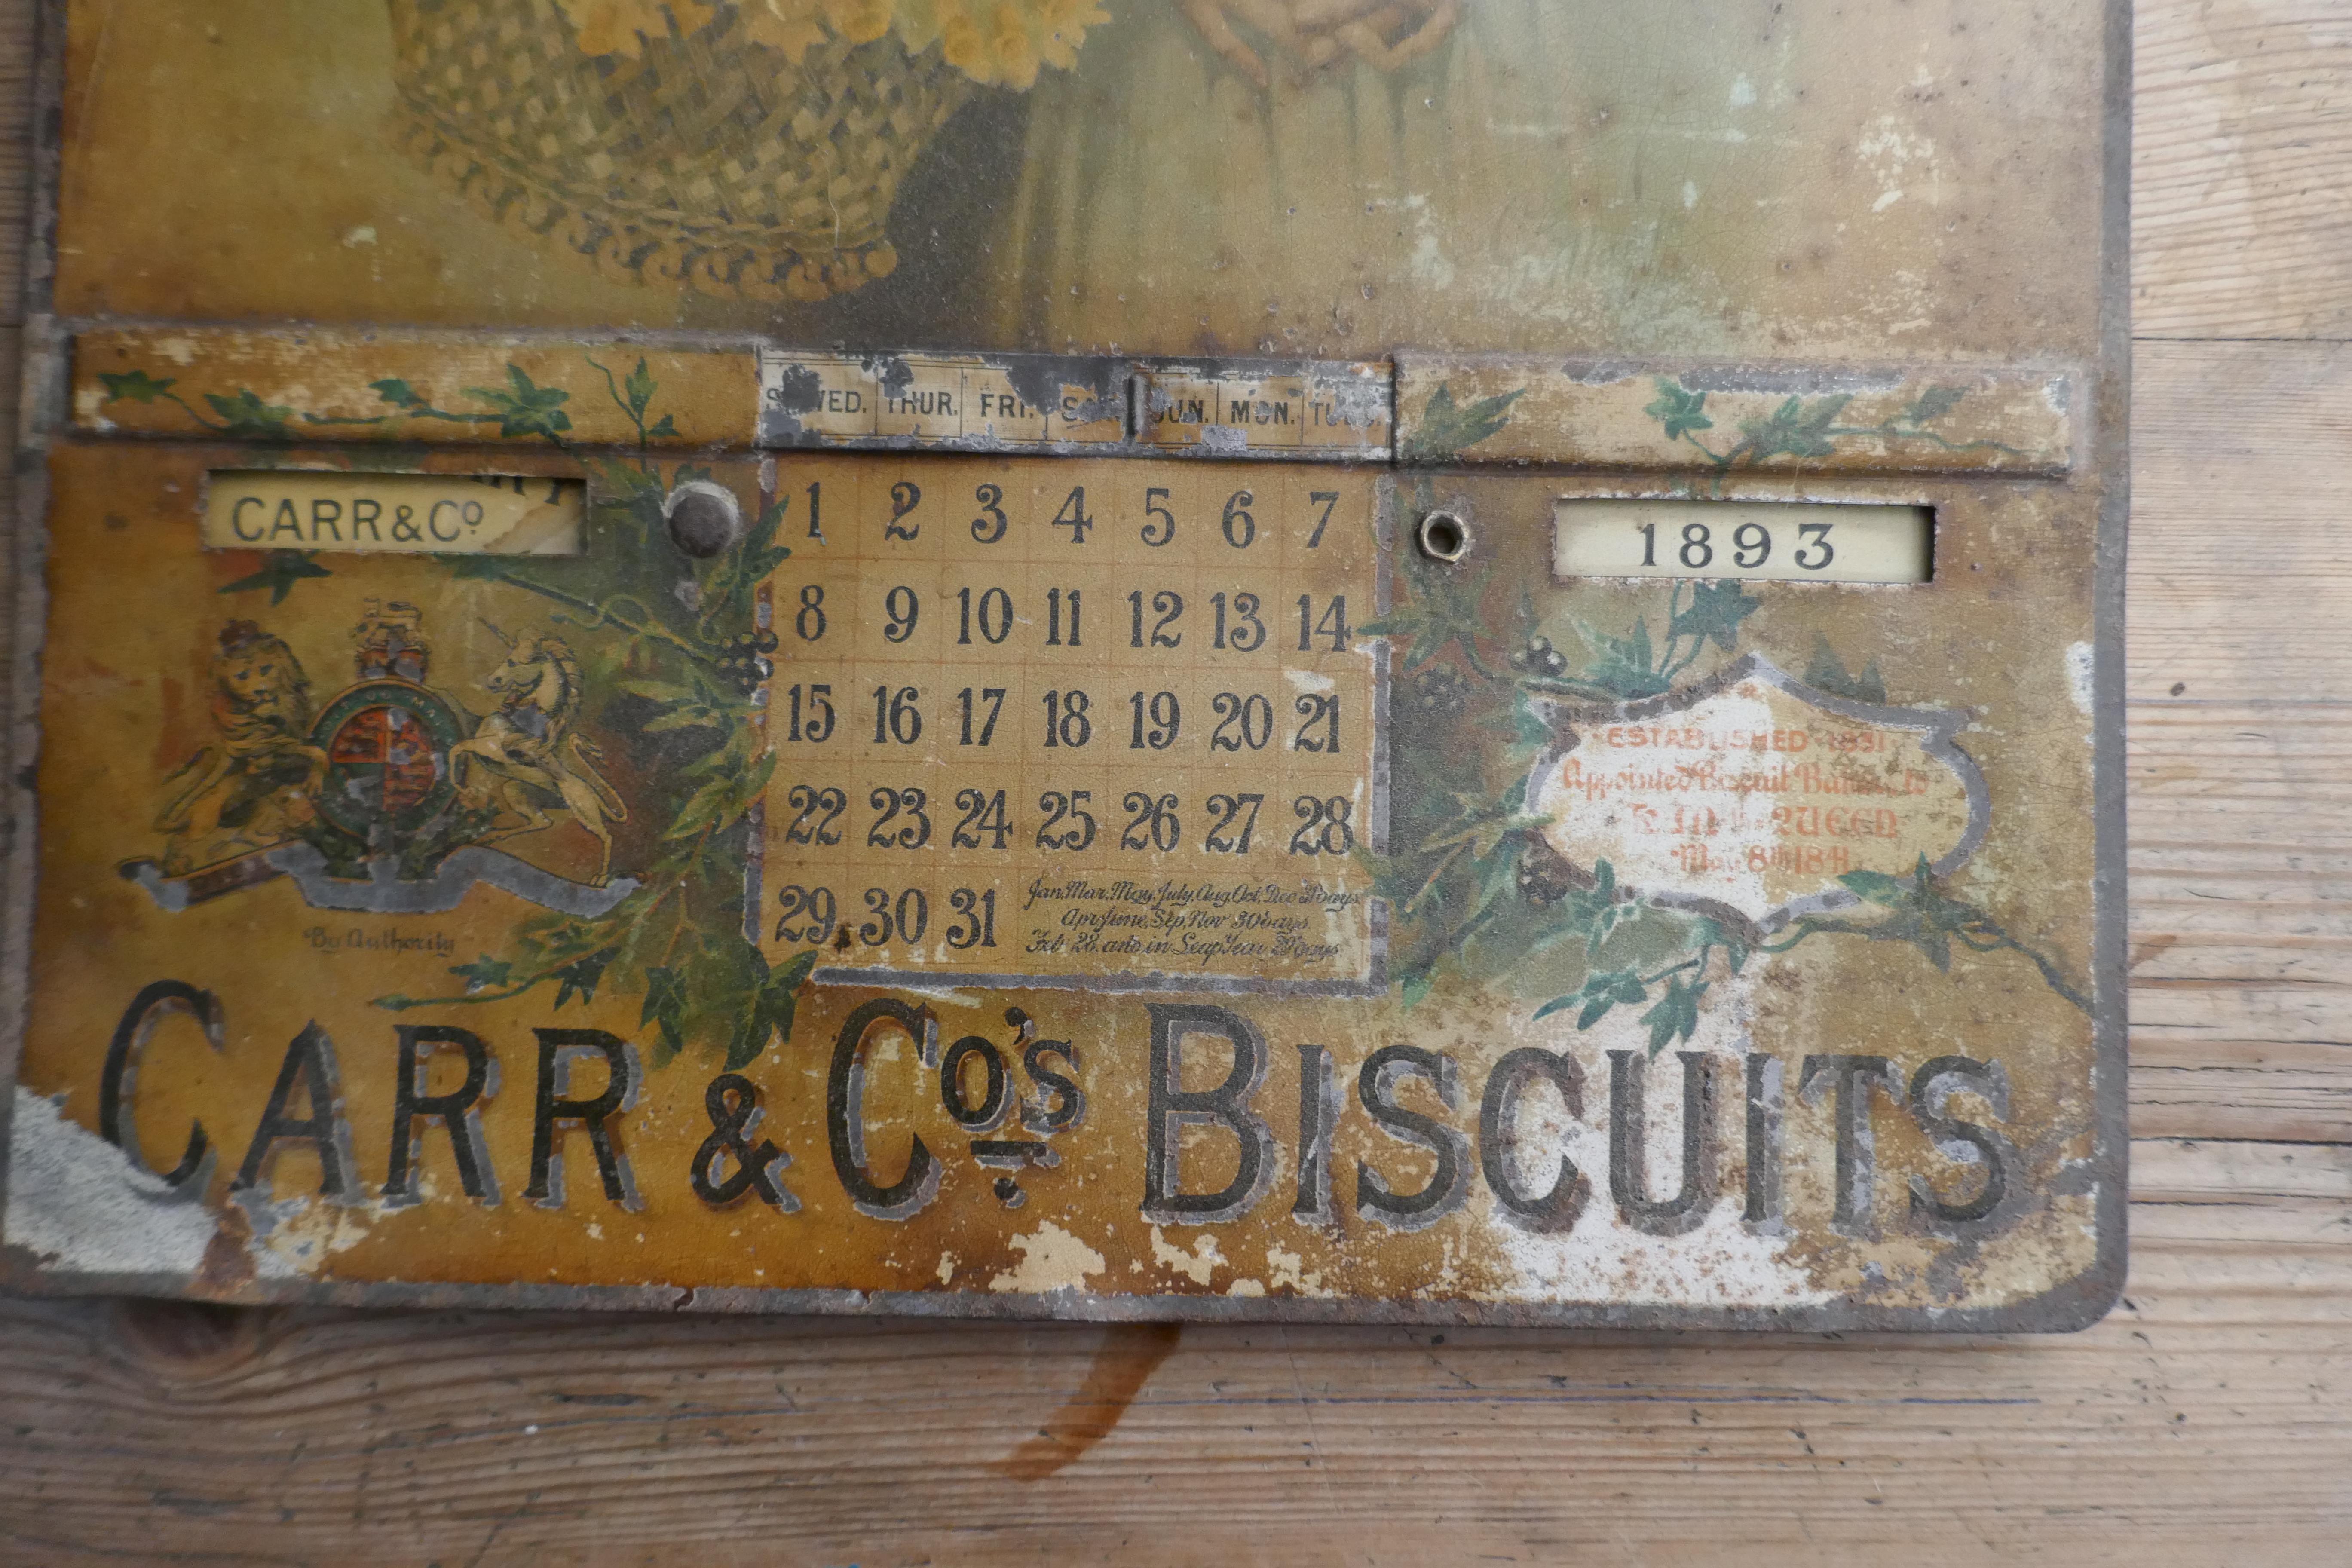 19th century tin plate perpetual calendar advertising Carr’s Biscuits 1893-1904

A great piece showing signs of wear now perhaps but this calendar was first issued in 1893, so perhaps we can excuse the condition
The day and year date wheels are